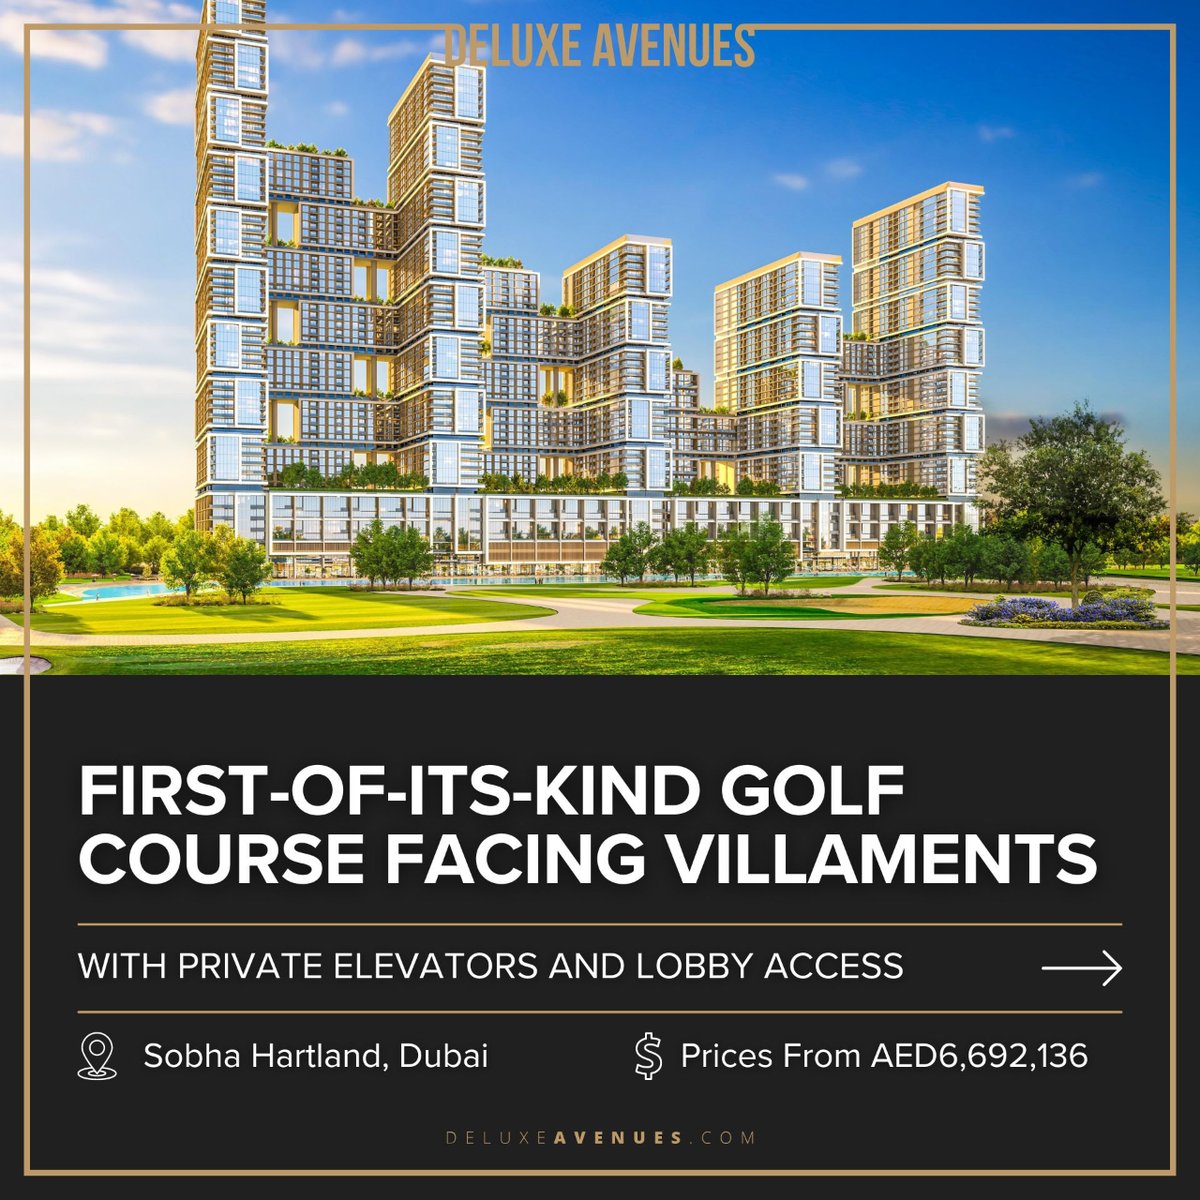 Elevate your lifestyle with #GolfRidges at #SobhaOne featuring #PrivateElevators within villaments that open to dedicated lobby access and parking right at your doorstep.

👉 Learn more at davenues.com/dubai/golf-rid…

#DeluxeAvenues #RealEstate #Dubai #DubaiRealEstate #DubaiAvenues